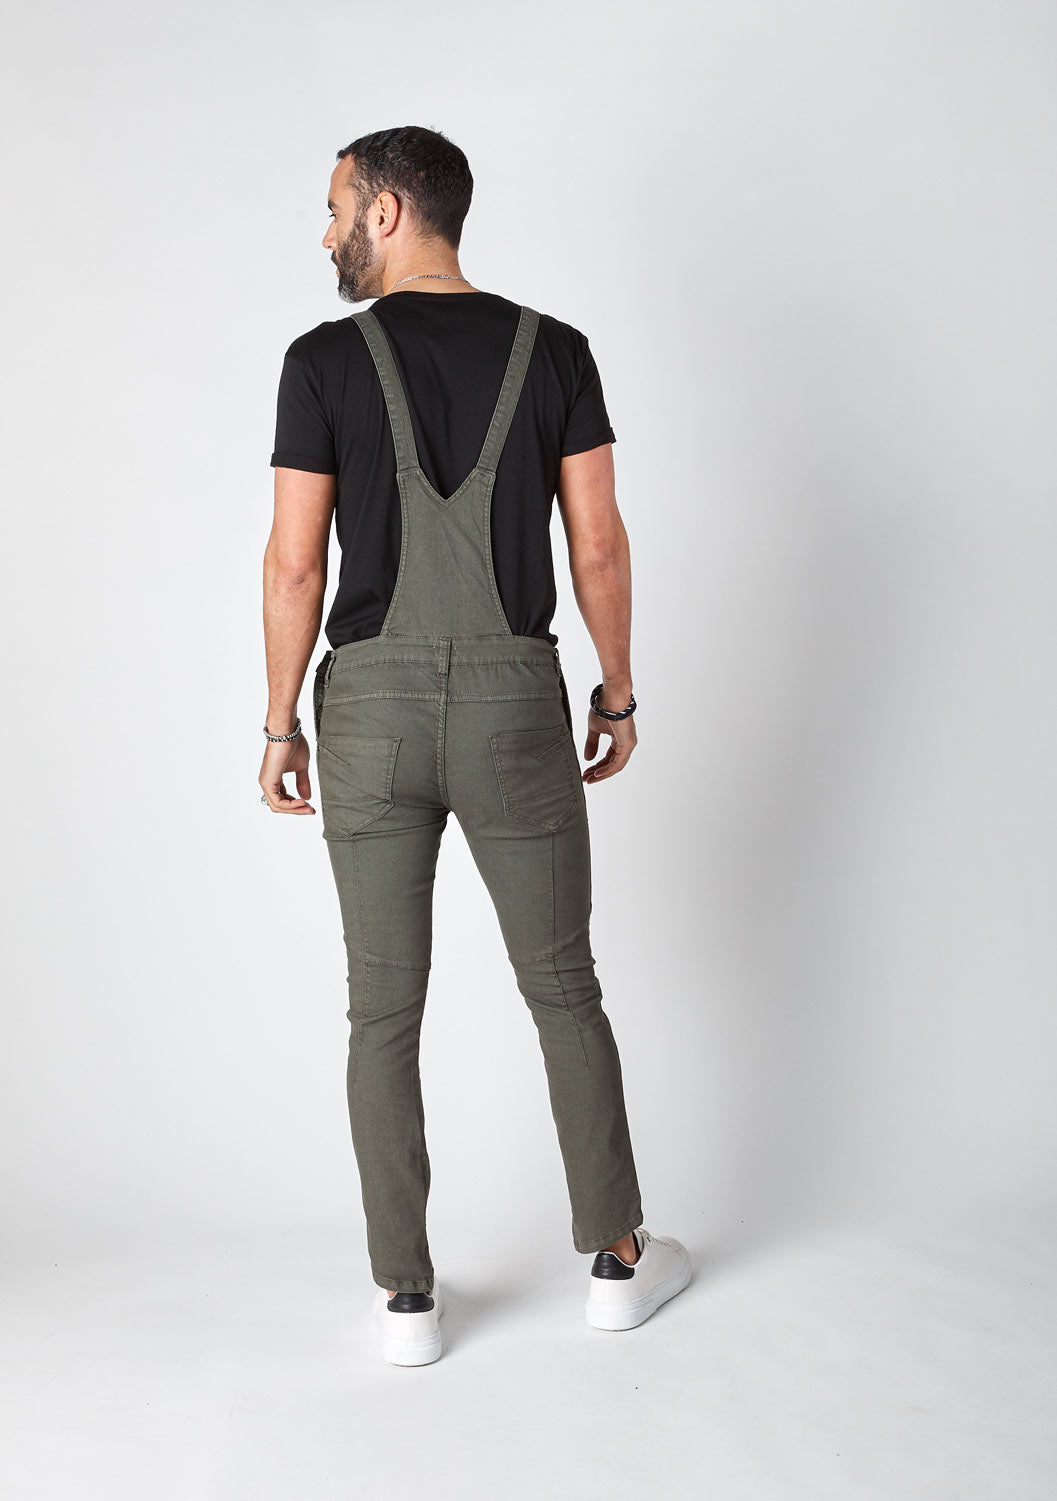 Rear pose wearing mens skinny fit dungarees with focus on cross straps.